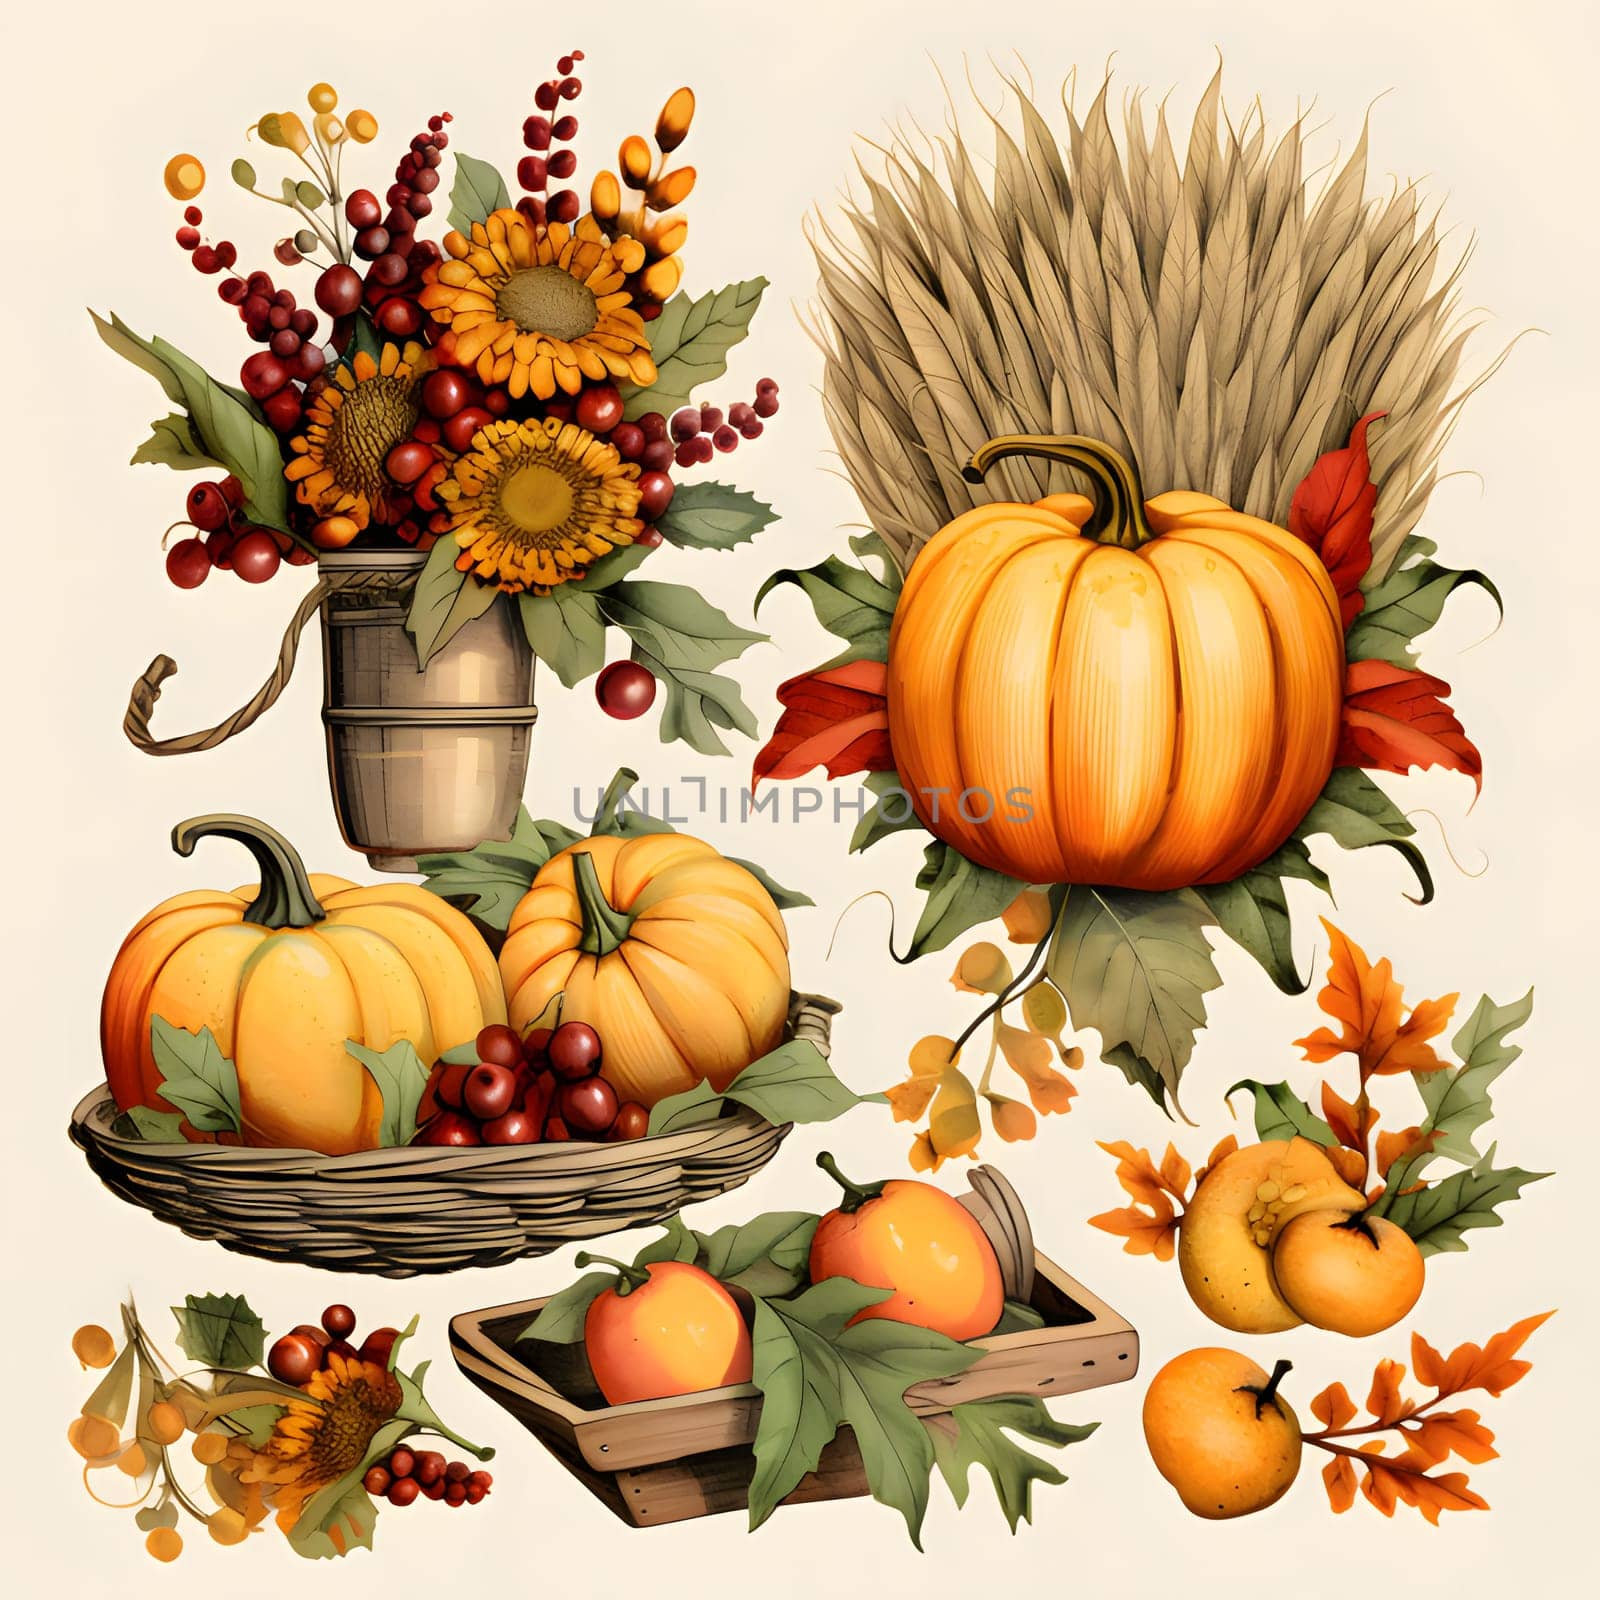 Stickers related to harvest, vegetables, fruits. Pumpkin as a dish of thanksgiving for the harvest, picture on a white isolated background. by ThemesS